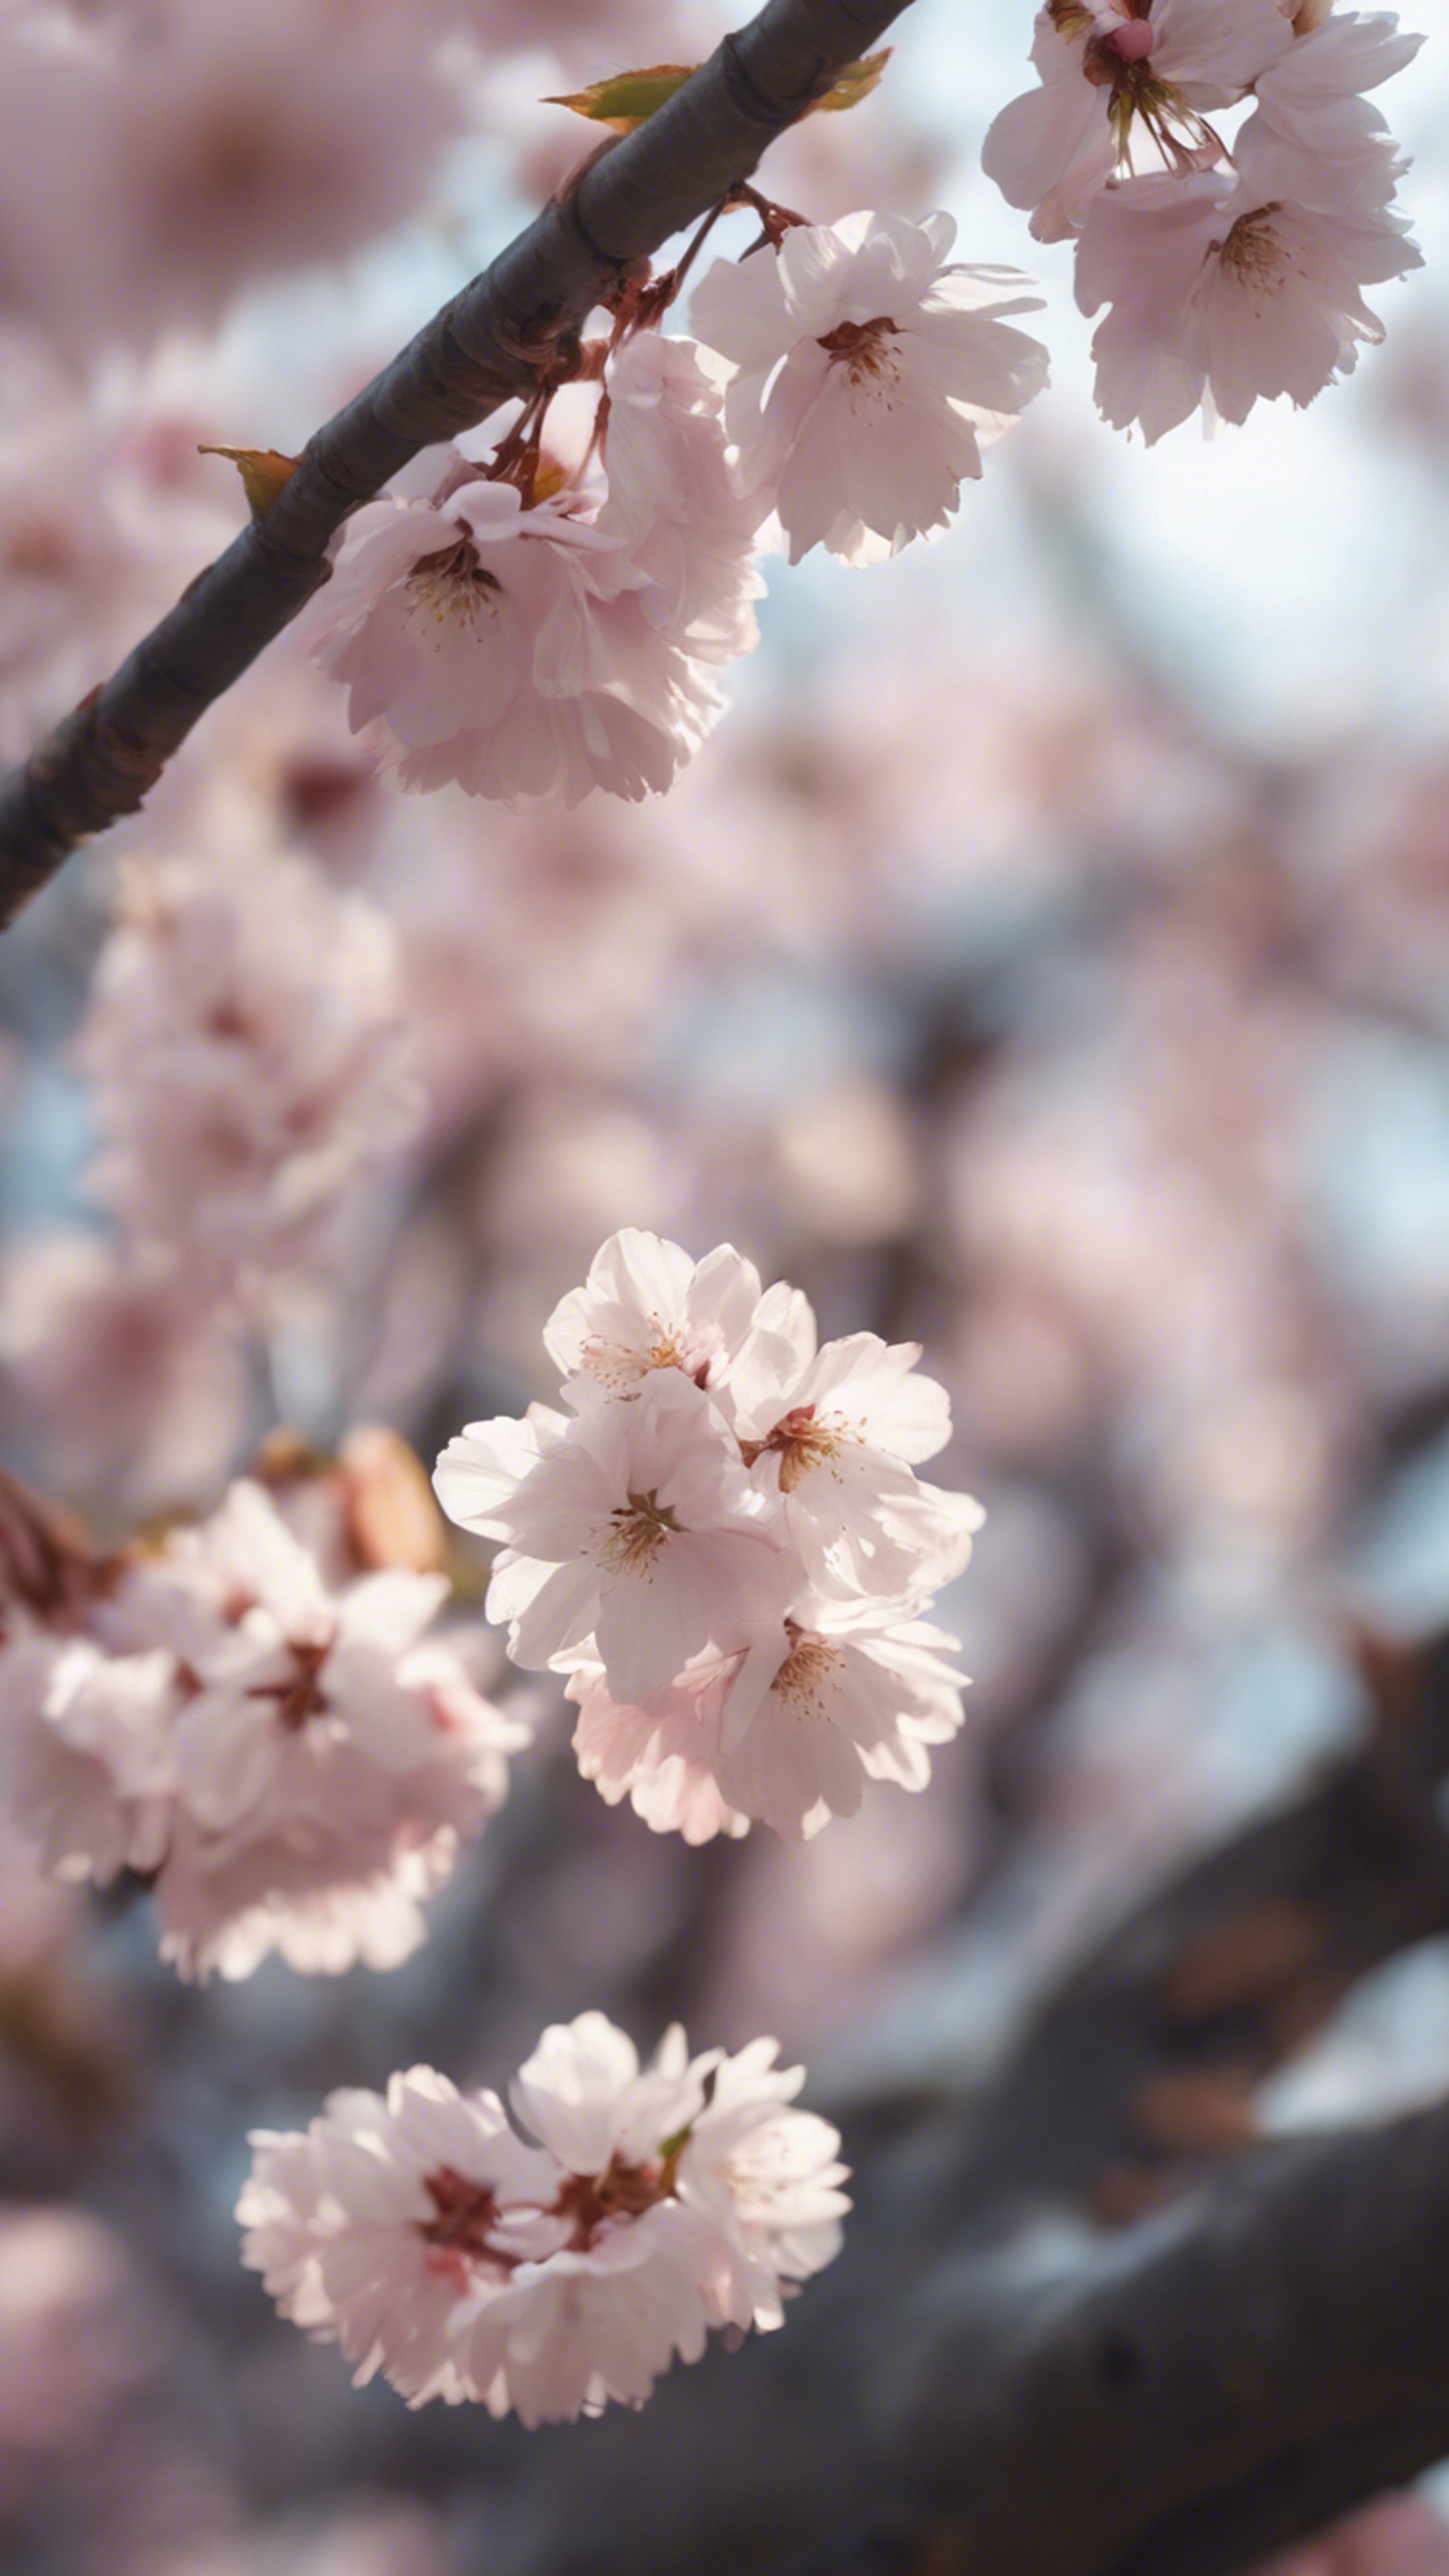 A close-up view of cherry blossom petals falling gently from the tree. Sfondo[73cf20157d554b6991b4]